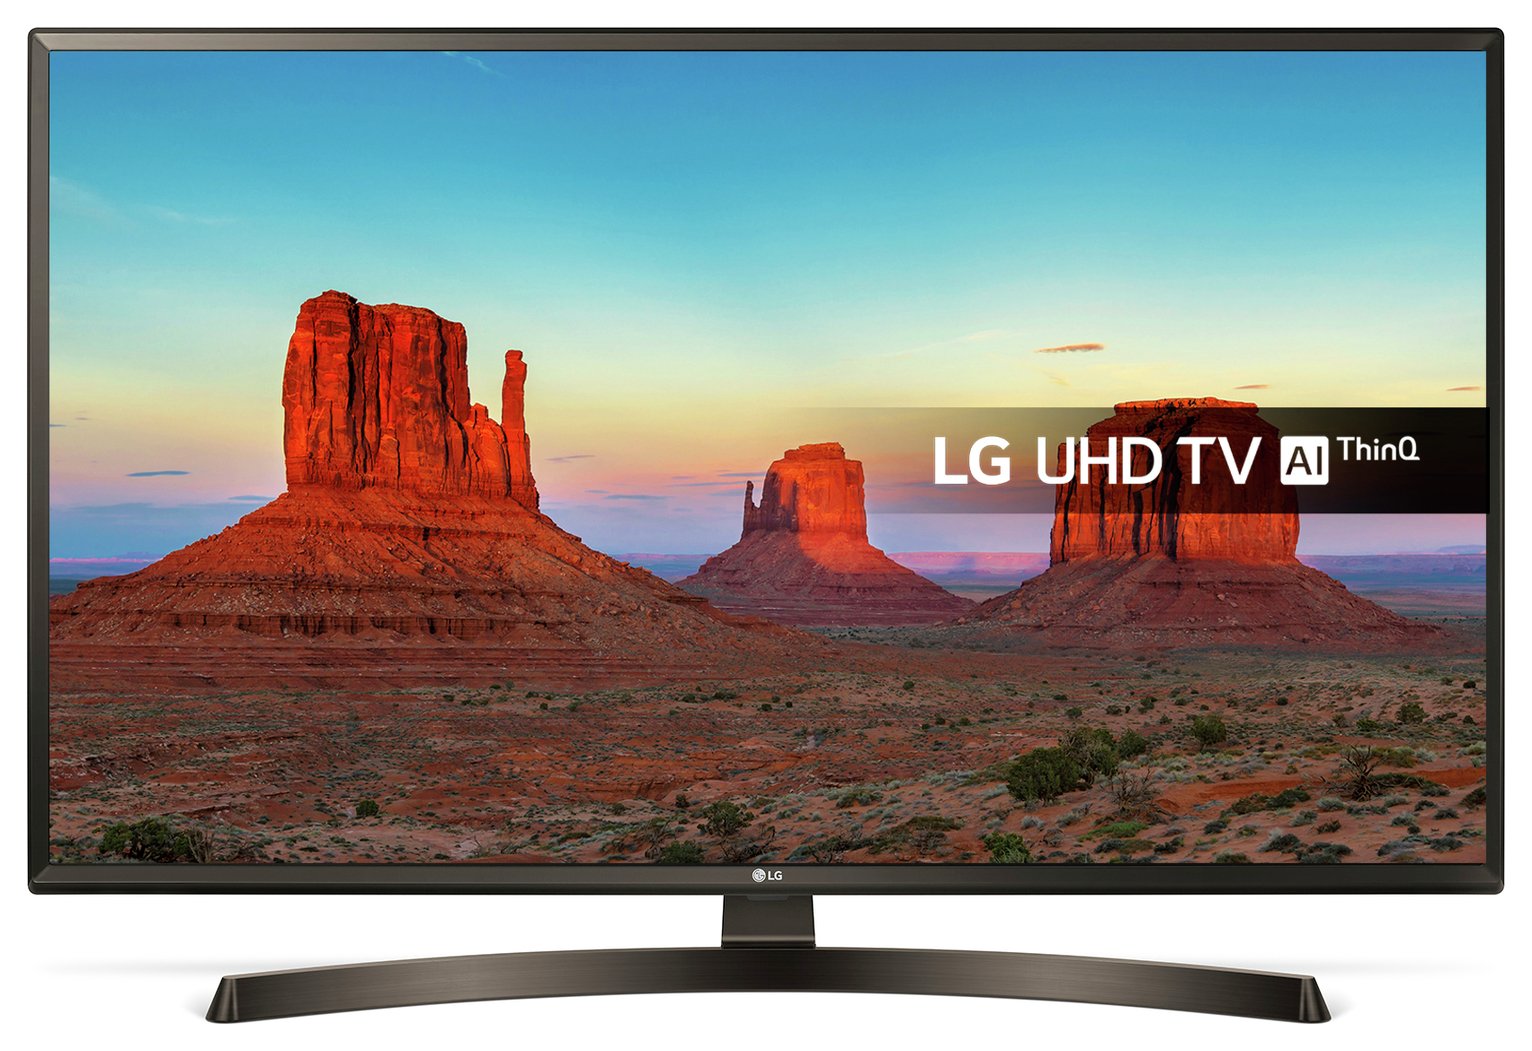 Lg 43 Inch 43uk6400plf Smart Ultra Hd 4k Tv With Hdr 8193366 Argos